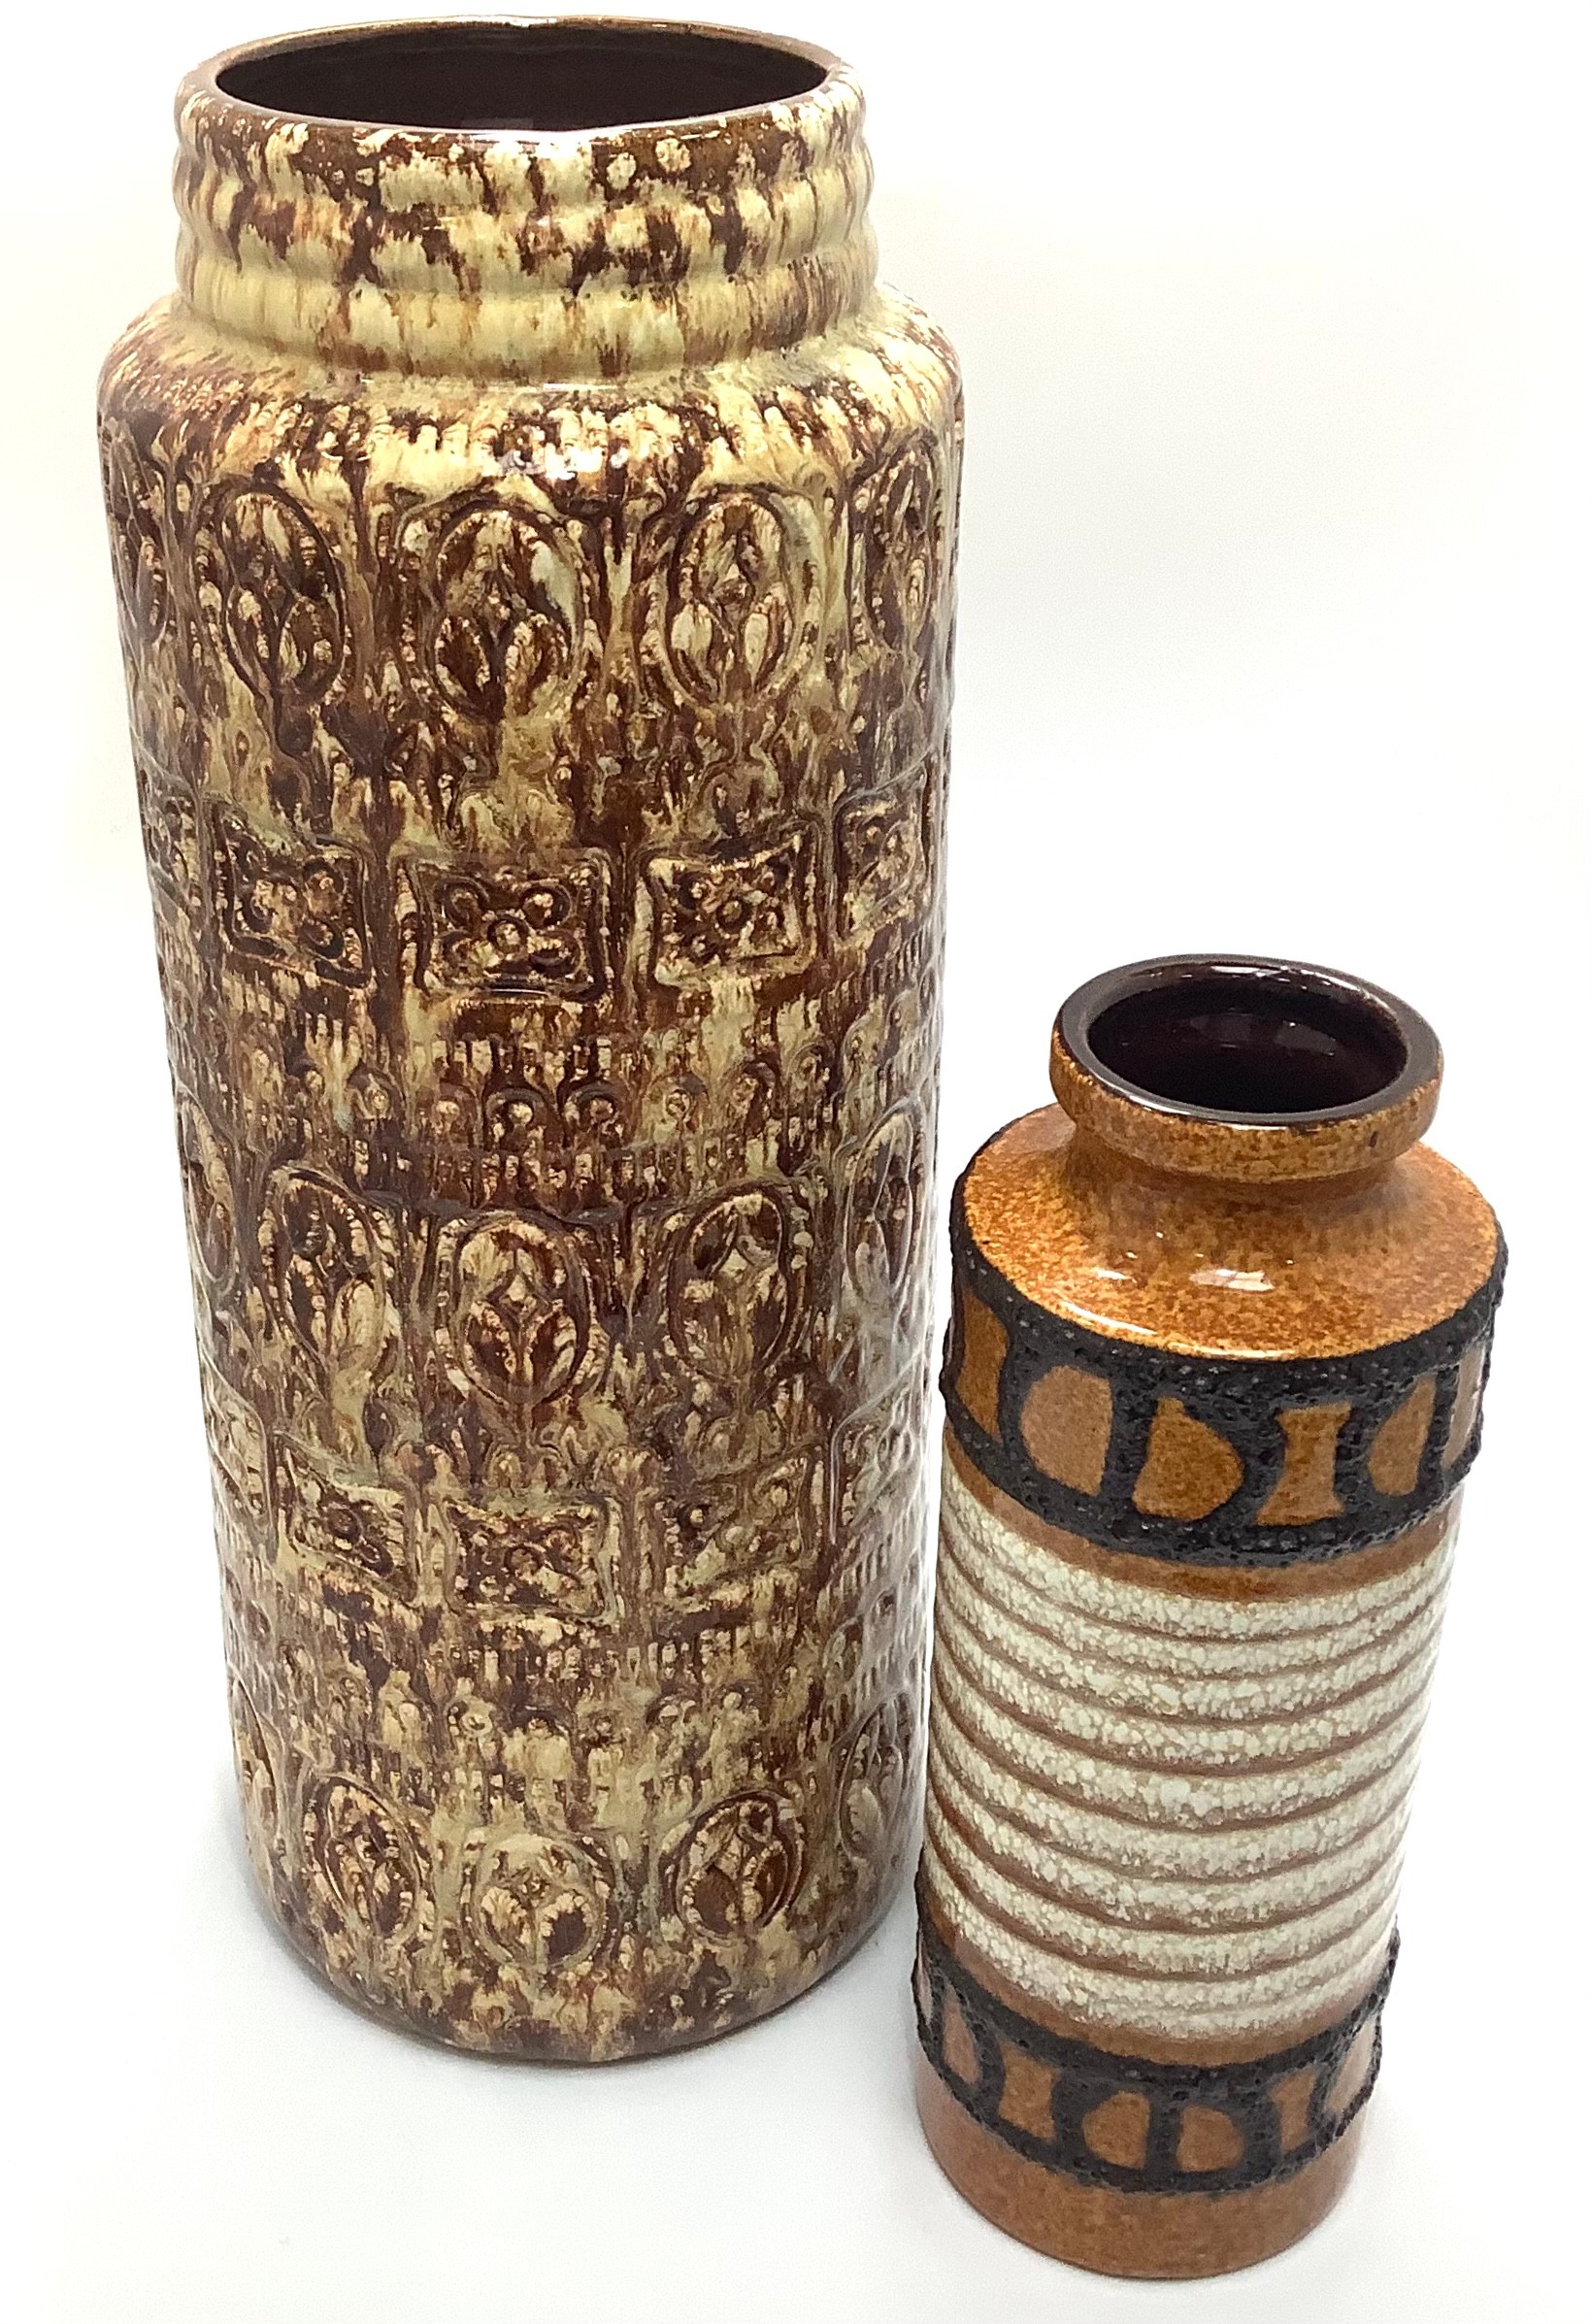 Two West German pottery vases in brown glazes, largest measures 41cm tall